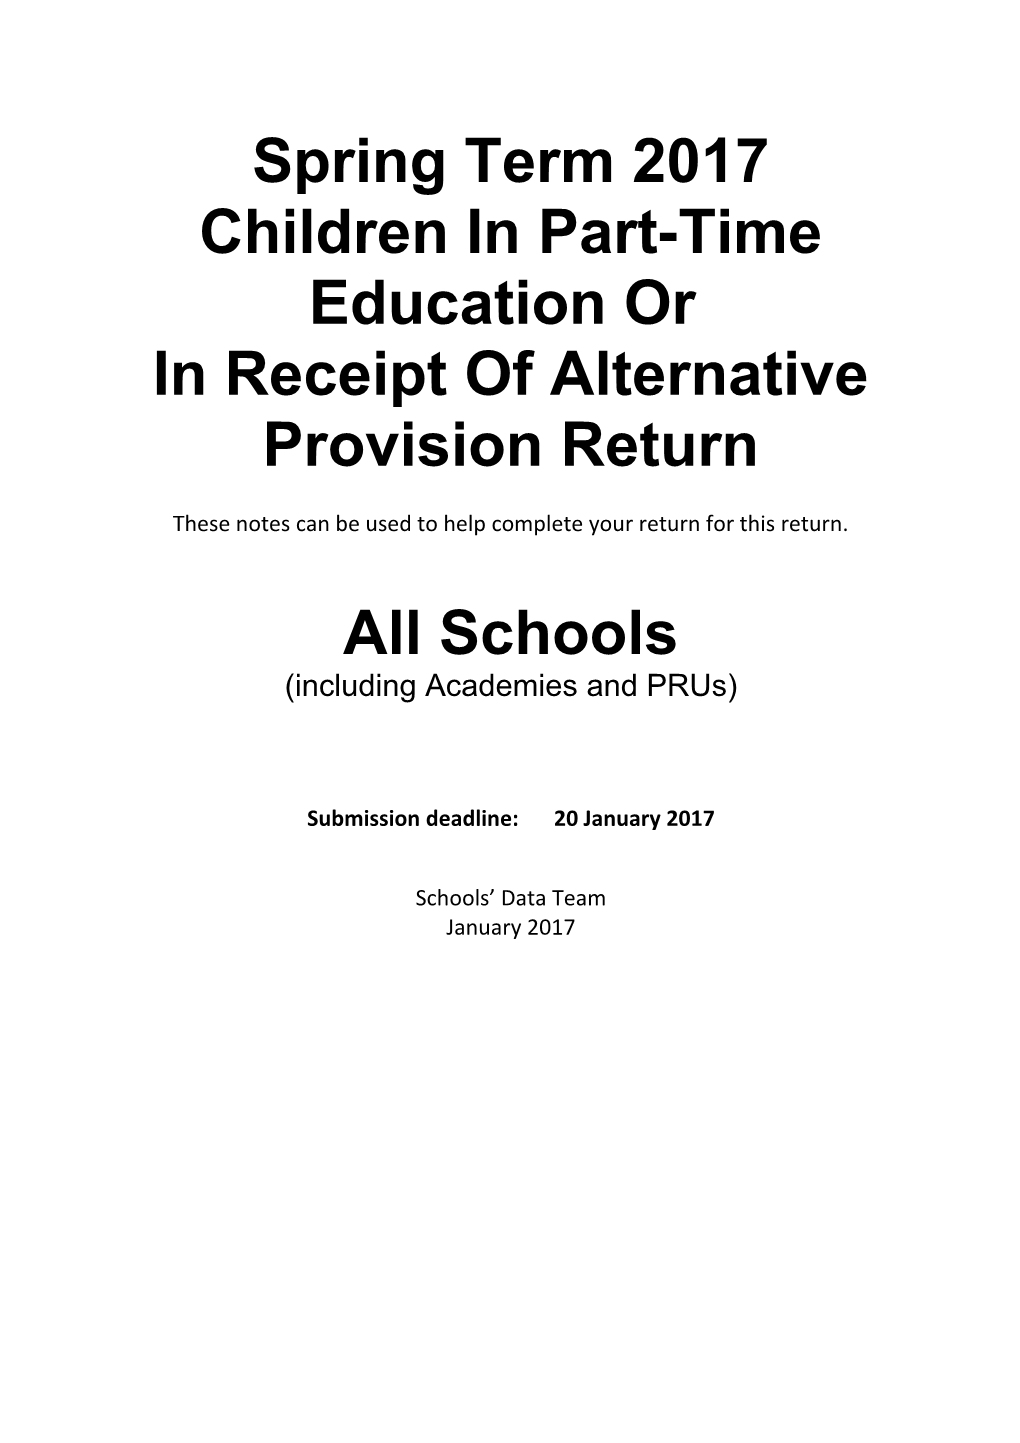 Spring Term 2017 Children in Part-Time Education Or in Receipt of Alternative Provision Return